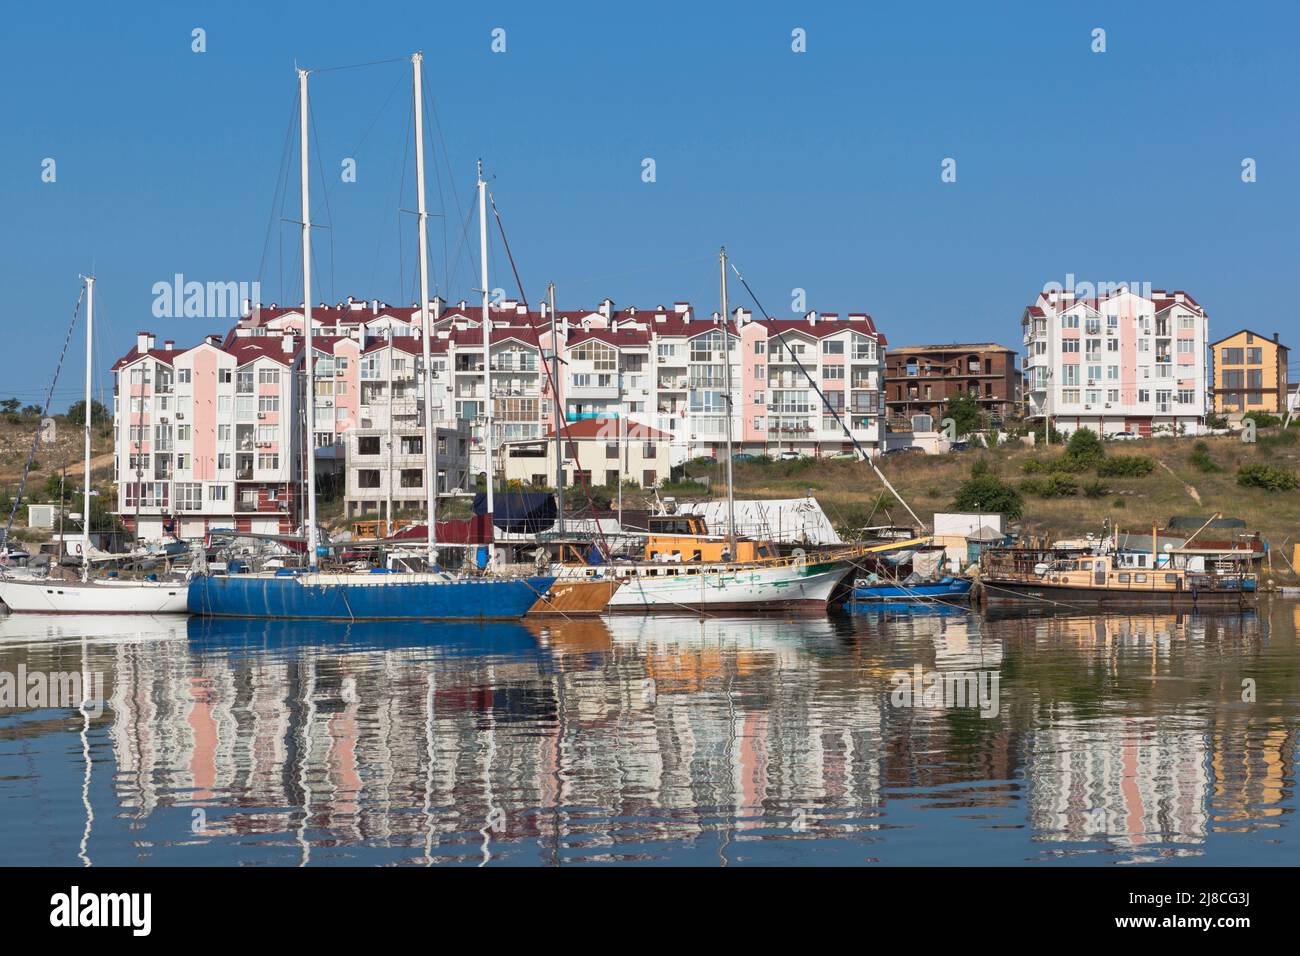 Sevastopol, Crimea, Russia - July 28, 2021: Sailing yachts at the pier in the Cossack Bay of the city of Sevastopol, Crimea Stock Photo